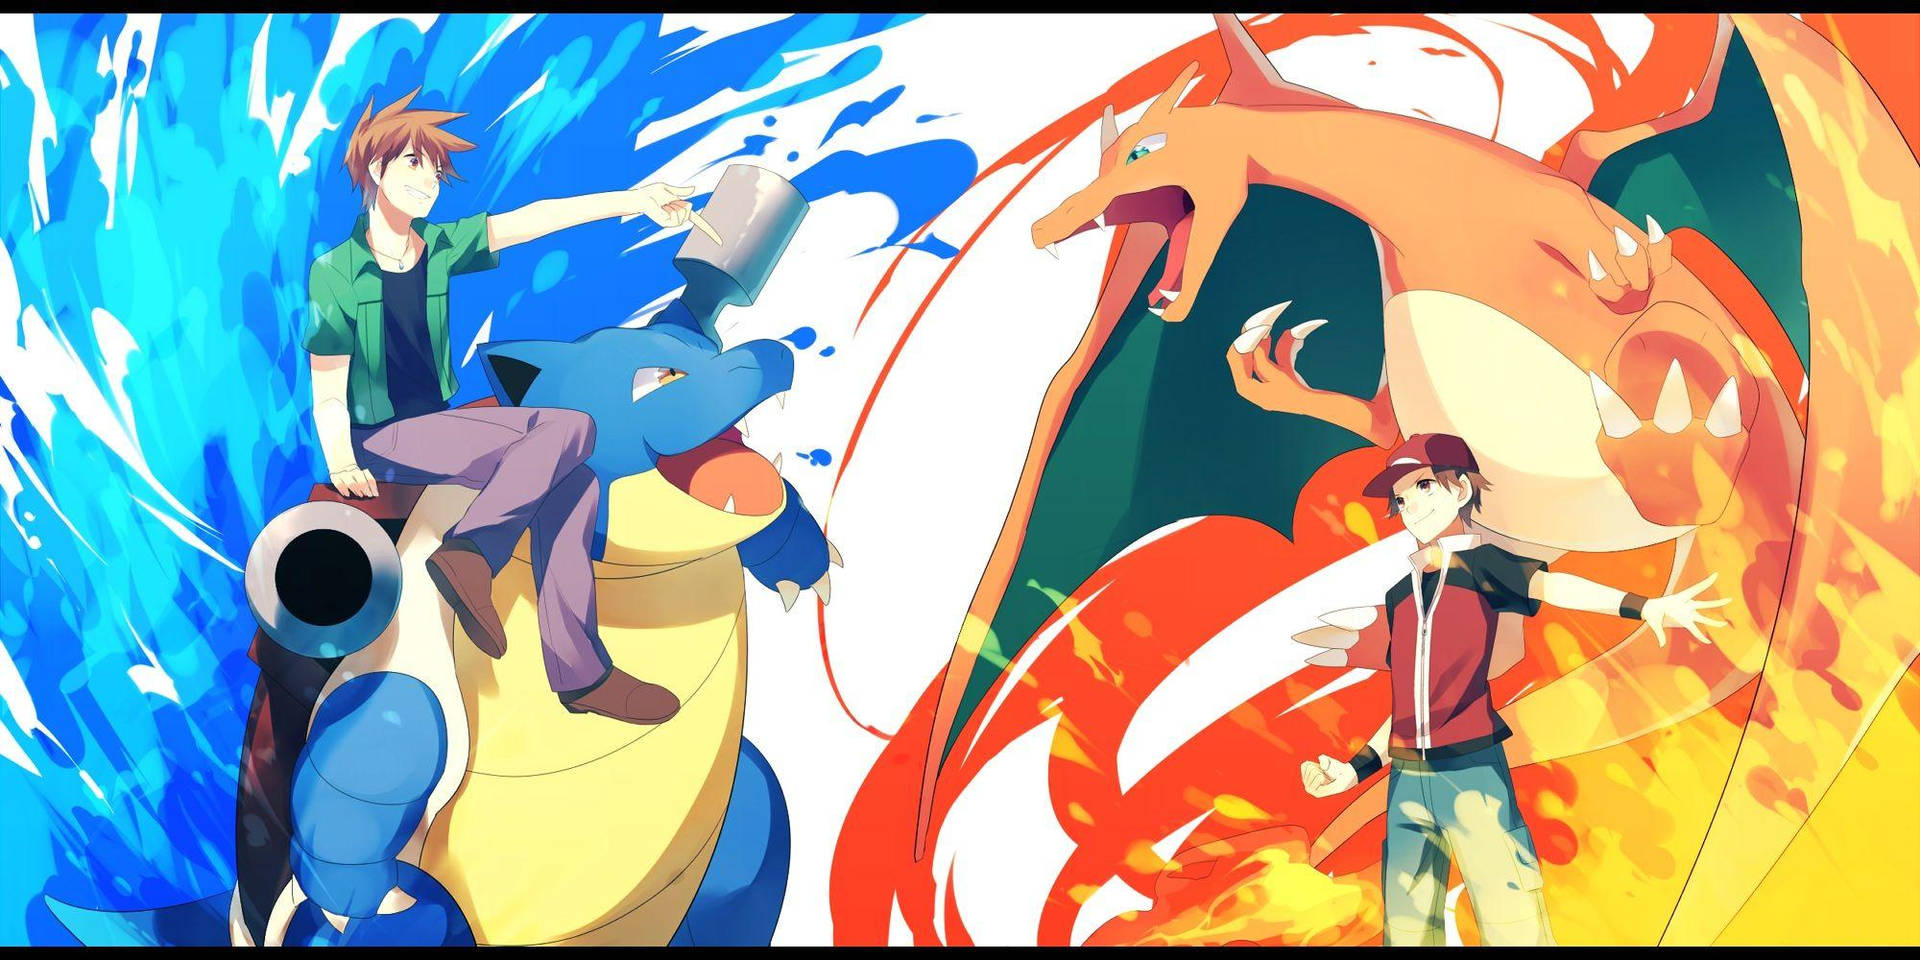 The Ultimate Duel - Blastoise And Charizard's Epic Match! Background